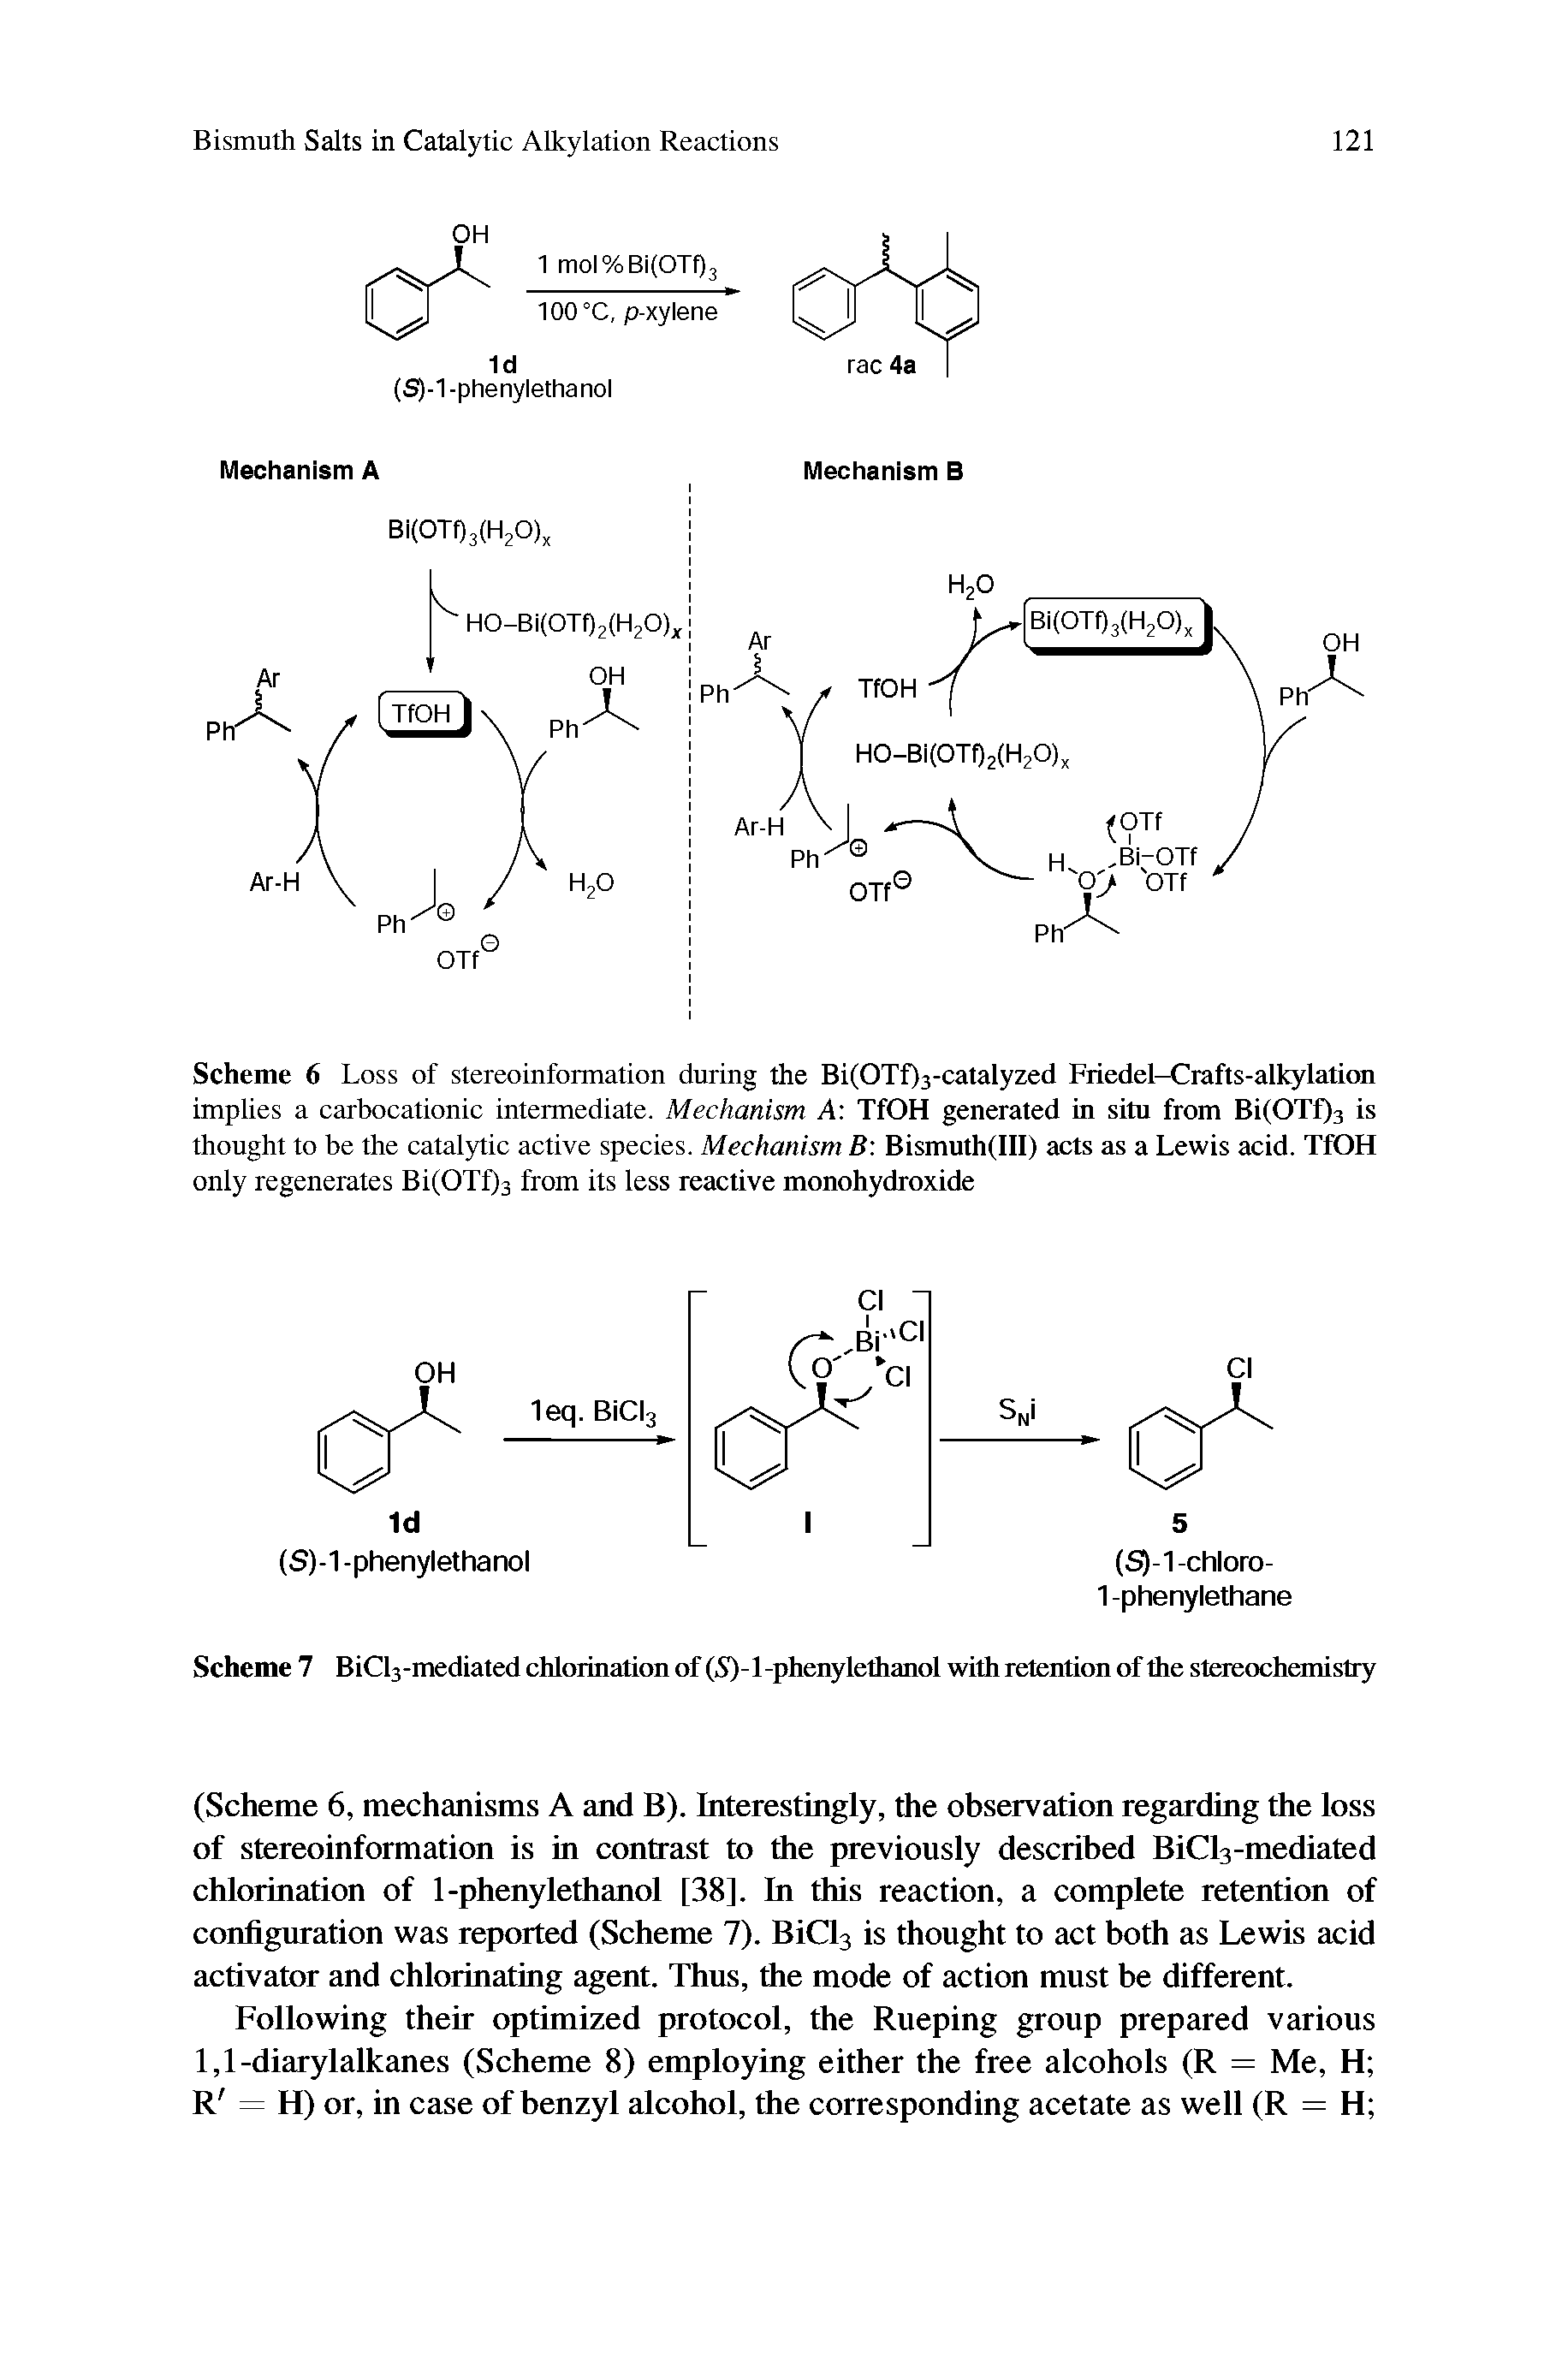 Scheme 6 Loss of stereoinformation during the Bi(OTf)3-catalyzed Friedel-Crafts-alkylation implies a carbocationic intermediate. Mechanism A TfOH generated in situ from Bi(OTf)3 is thought to be the catalytic active species. Mechanism B Bismuth(III) acts as a Lewis acid. TfOH only regenerates Bi(OTf)3 from its less reactive monohydroxide...